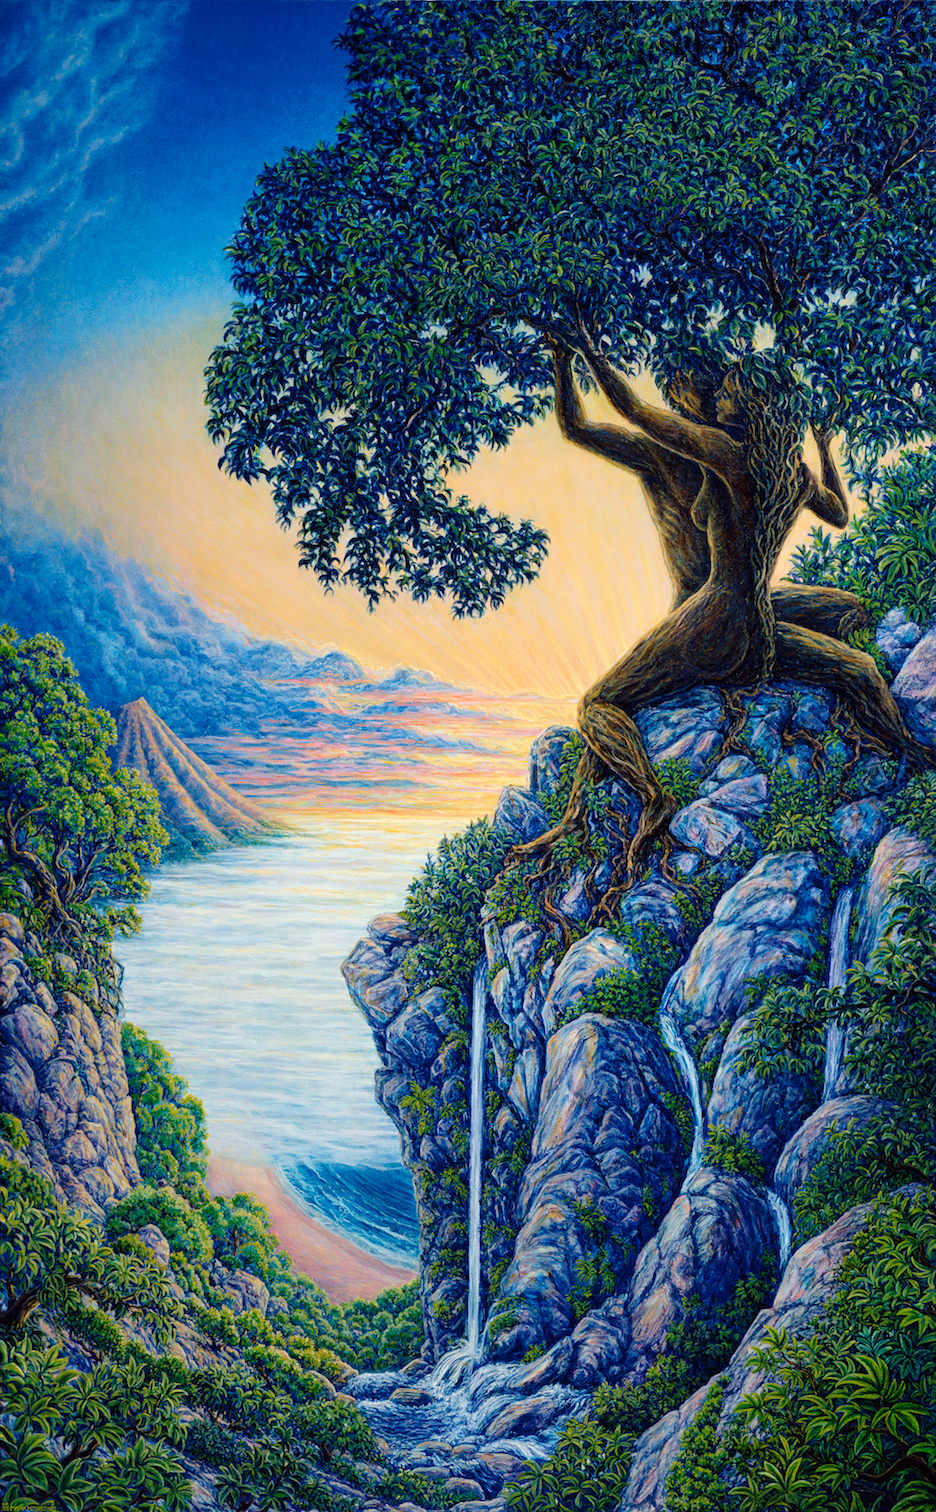 Arboreal Affection custom print from the original painting by Mark Henson